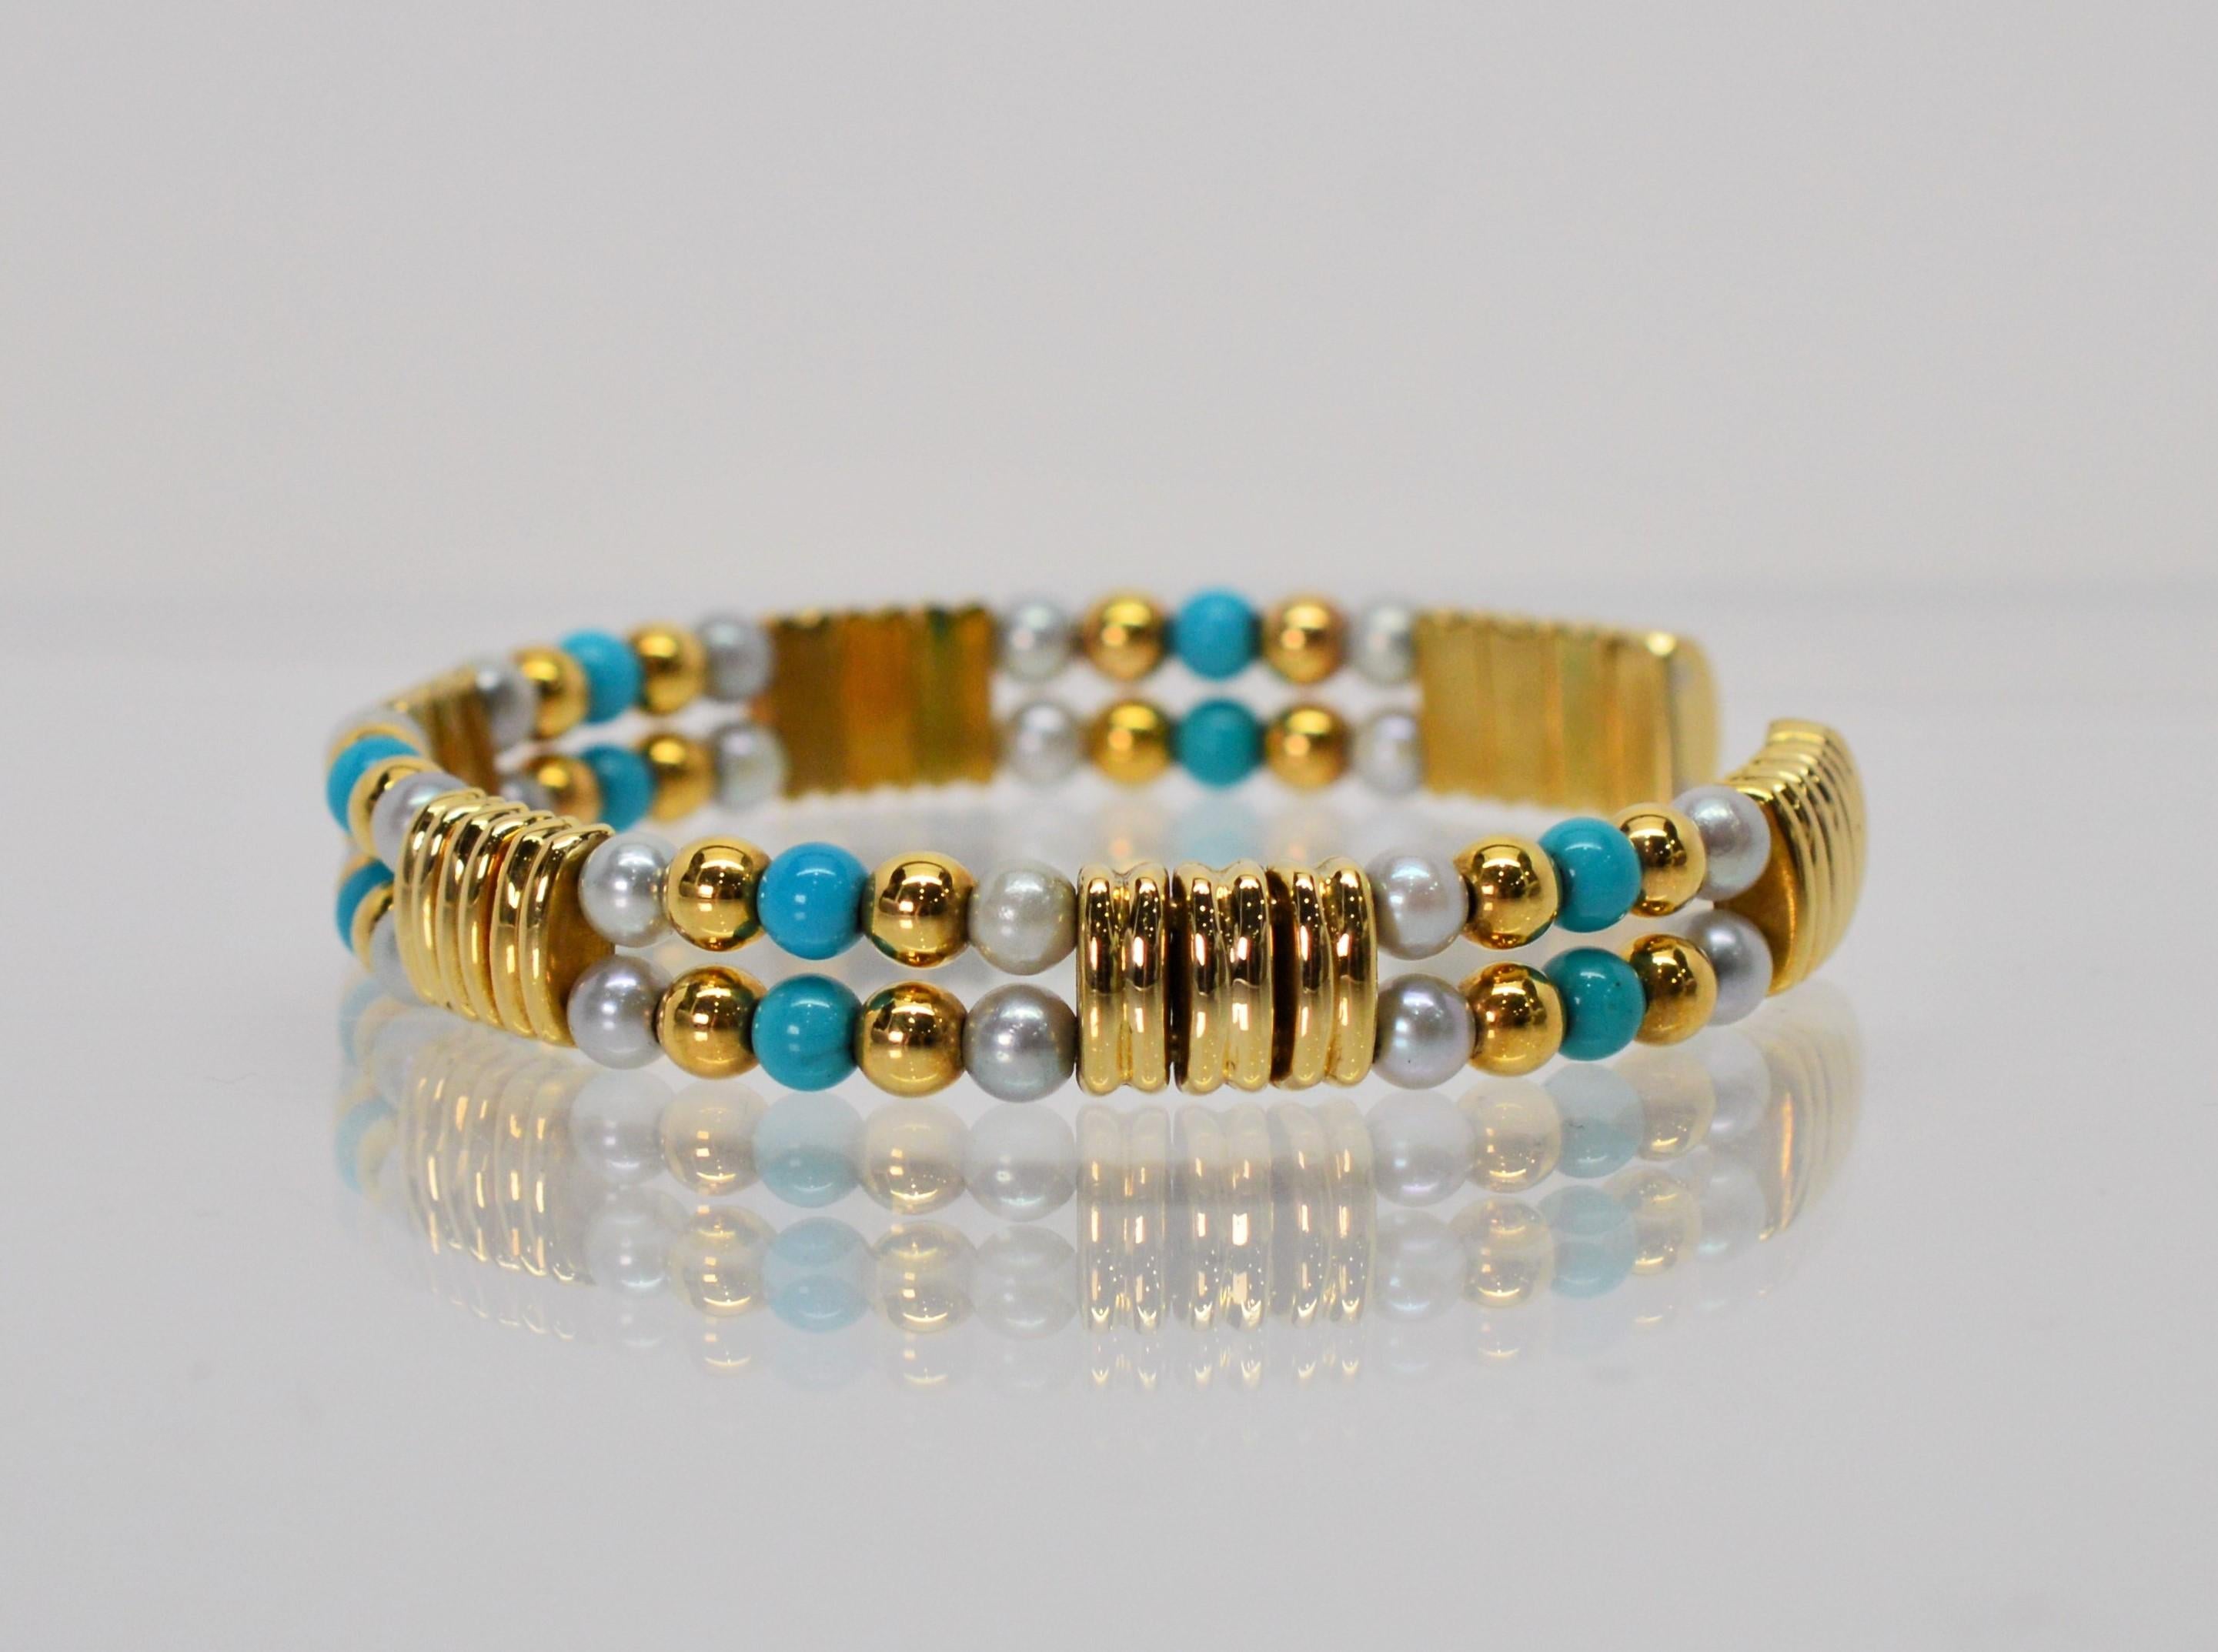 Cheerful and fresh. In eighteen karat 18K yellow gold, this quality made Italian cuff bracelet has pleasing mix shapes and colors. Rectangular gold links float across the double row cuff accented with turquoise and cultured pearl beading. Has